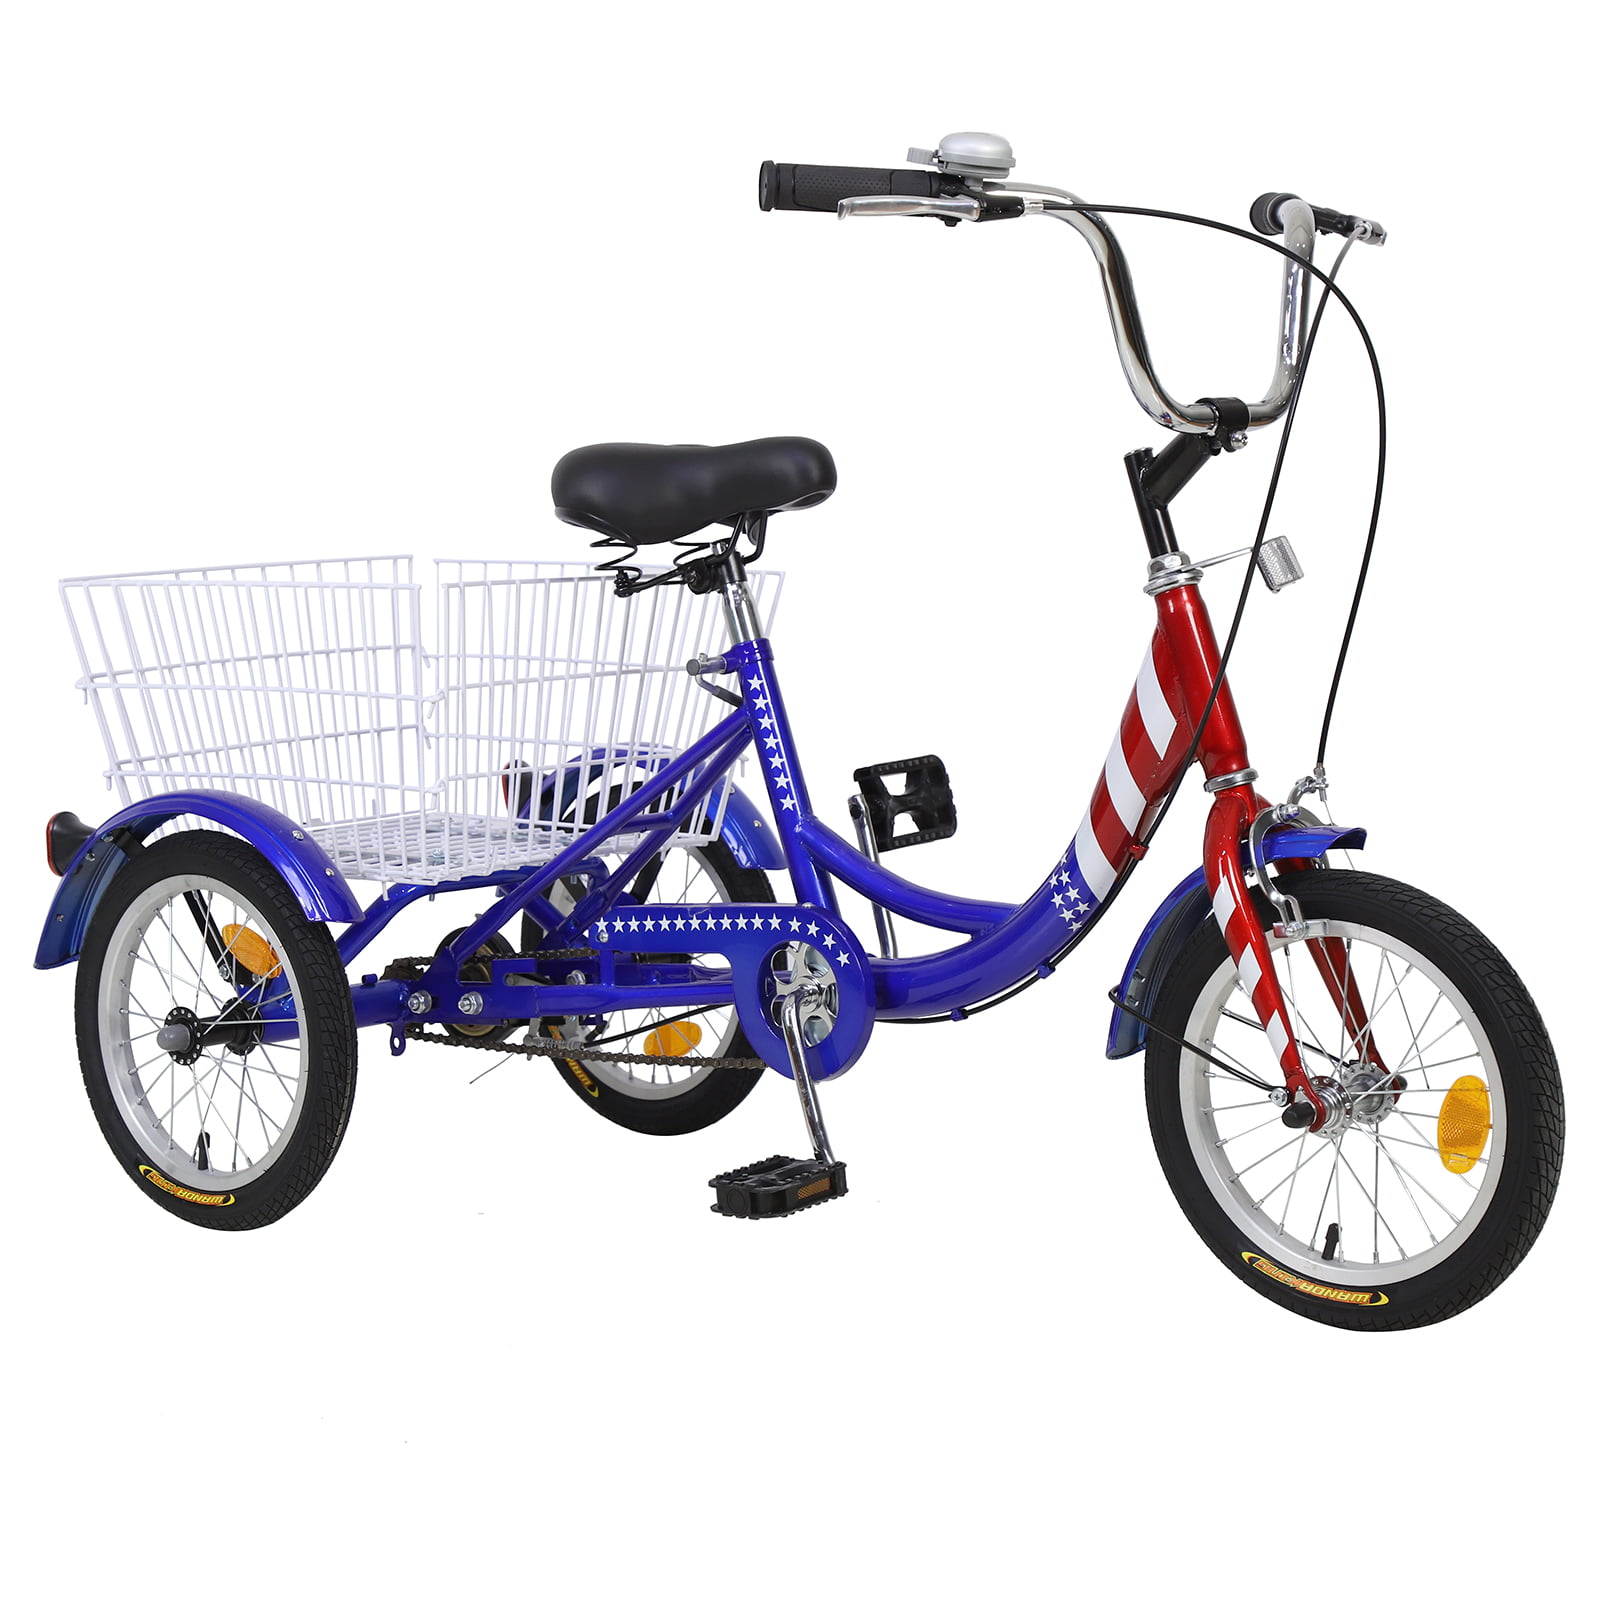 14" Trike Bike For Teens Adults Three Wheel Outdoor Drifting Tricycle 1 Speed 